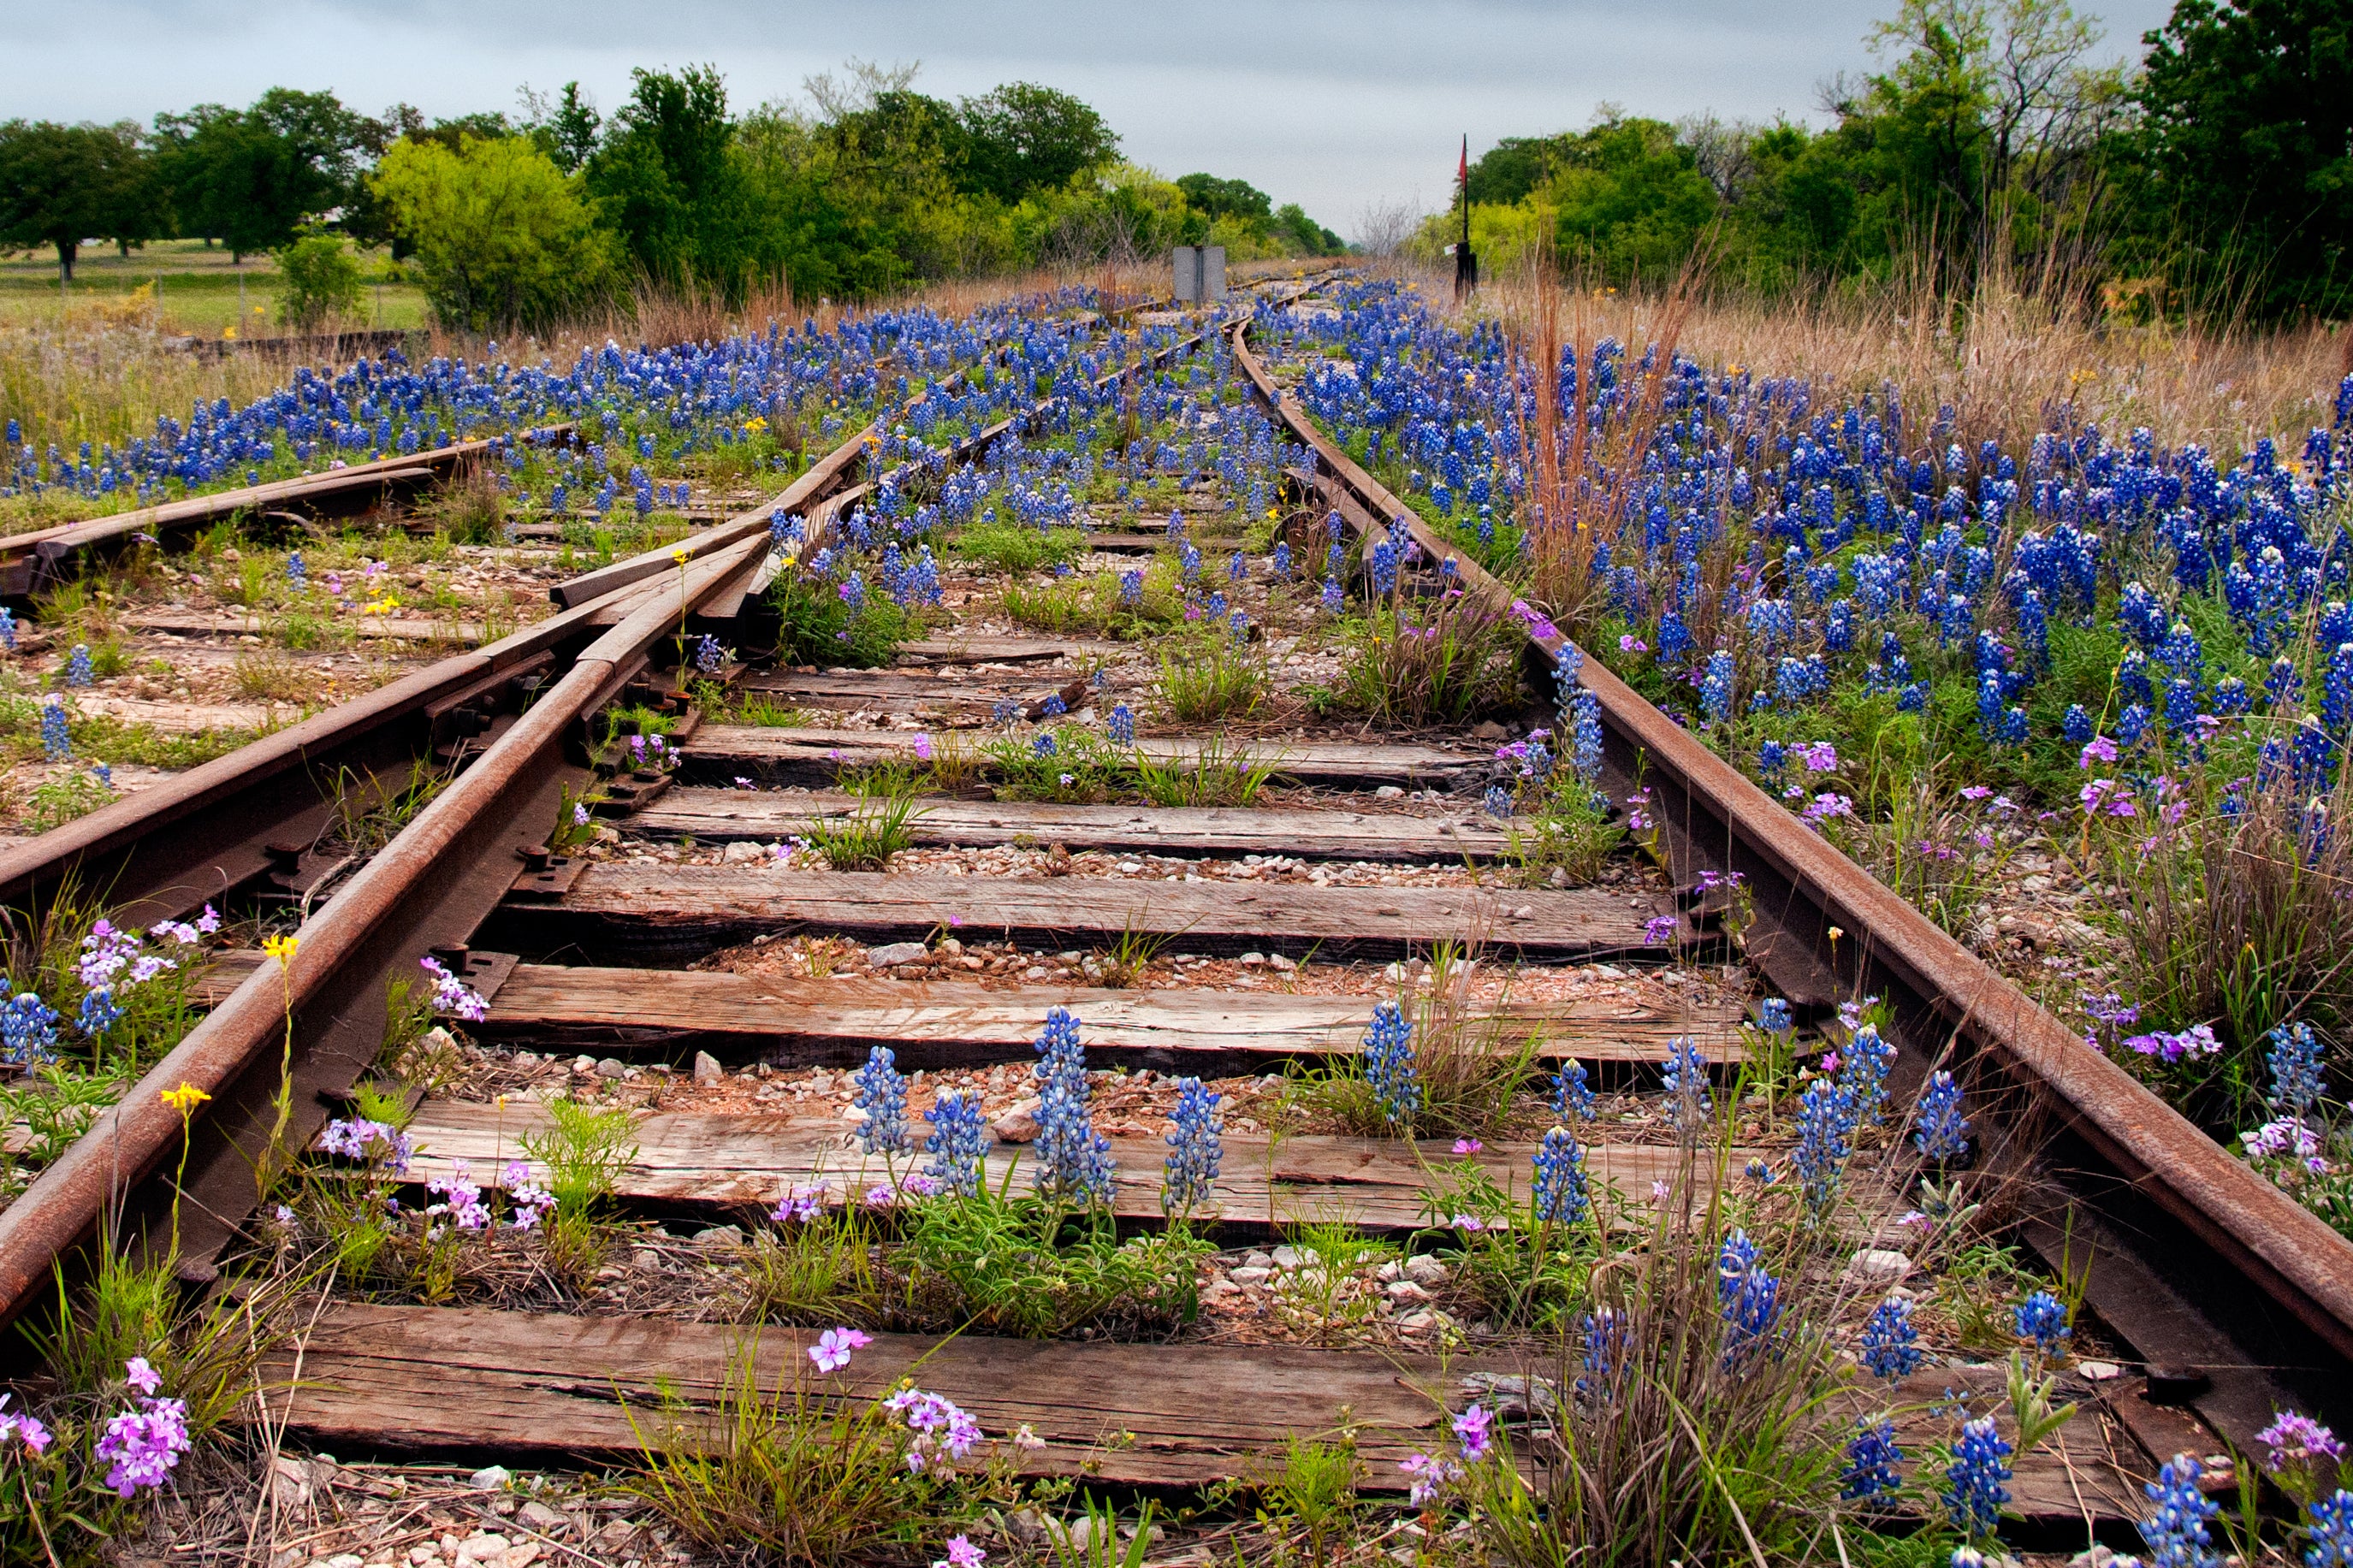 Texas Hill Country junction with bluebonnets creeping